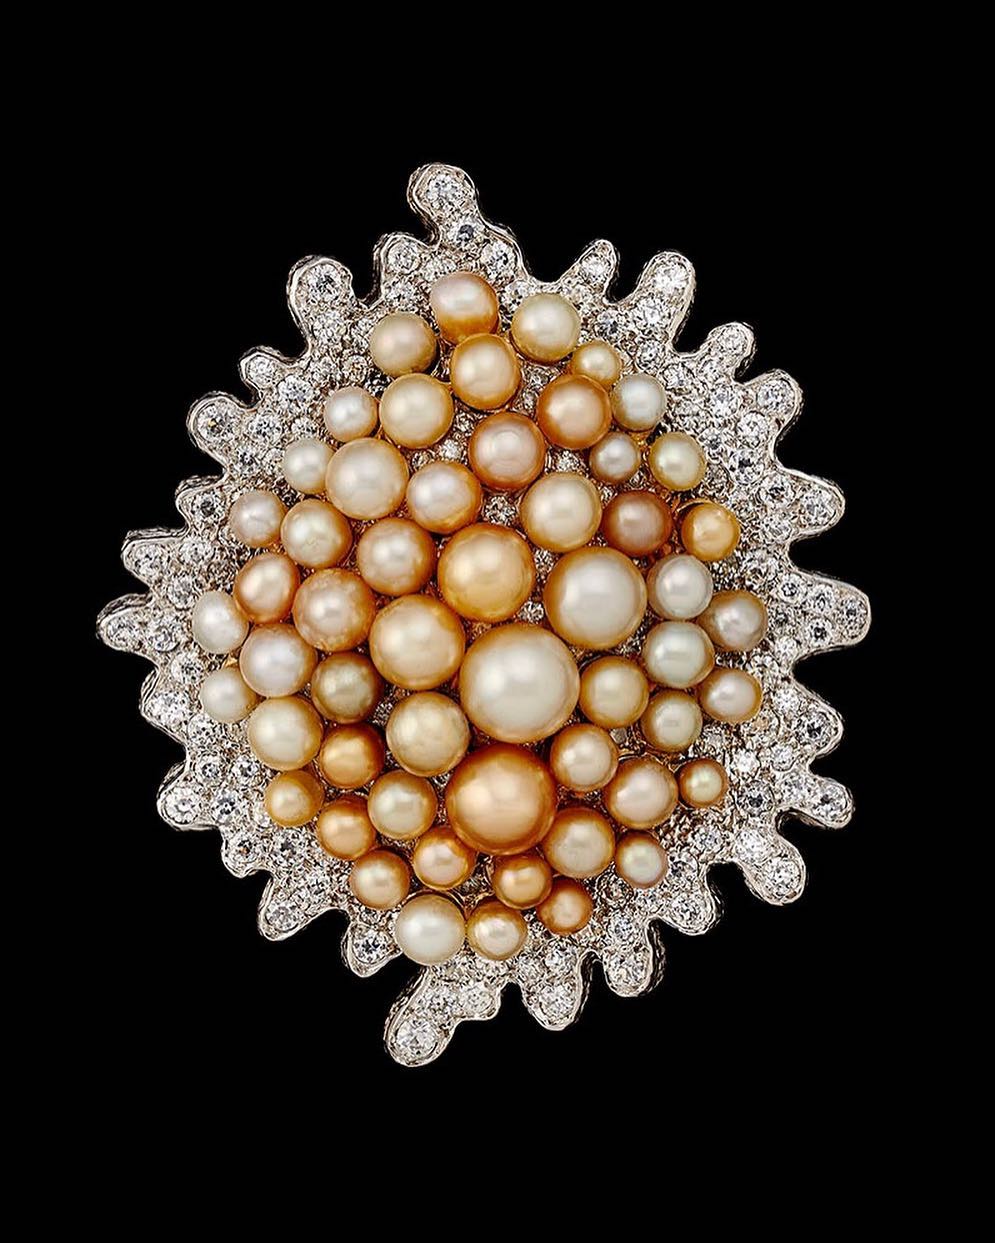 Brooch Pendant Set with Natural Pearls, diamonds and white gold by Jojo Grima. Image Courtesy of F Grima